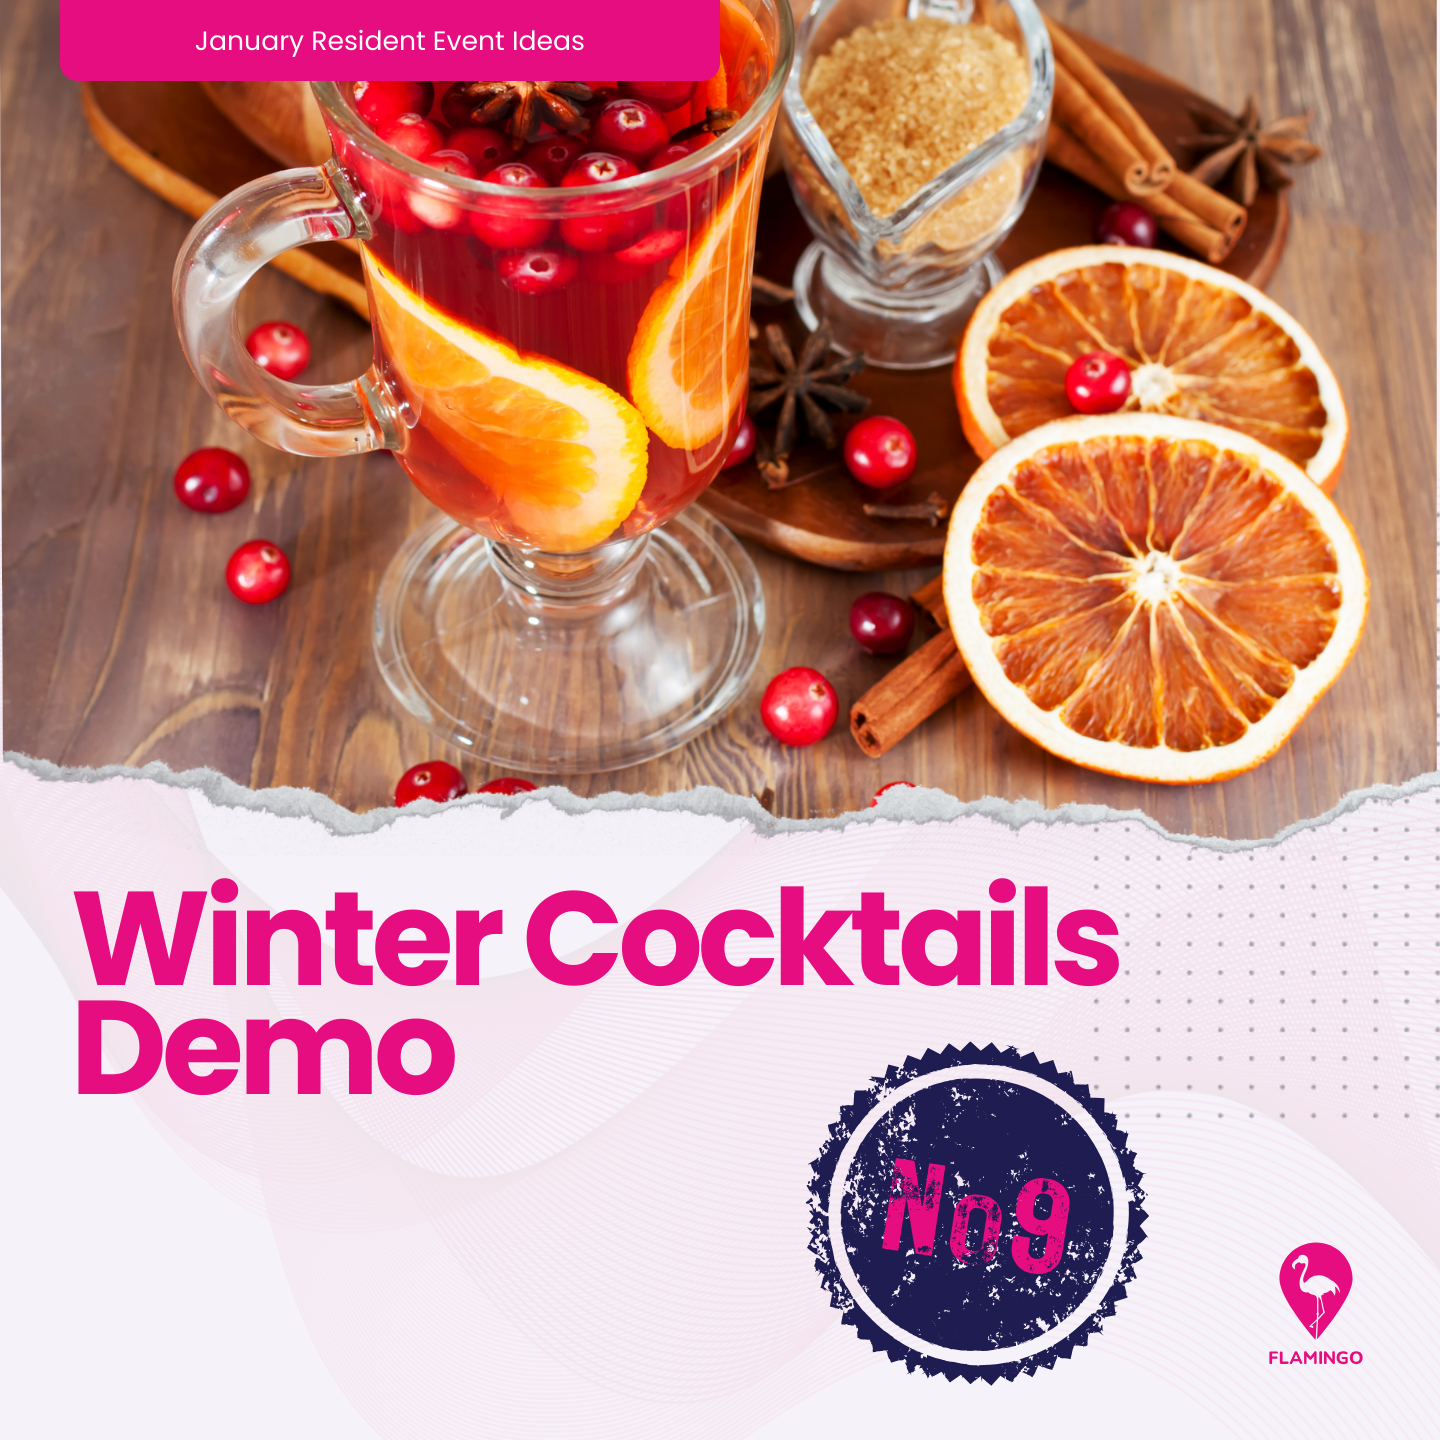 Winter Cocktails Demo | January Resident Event Ideas